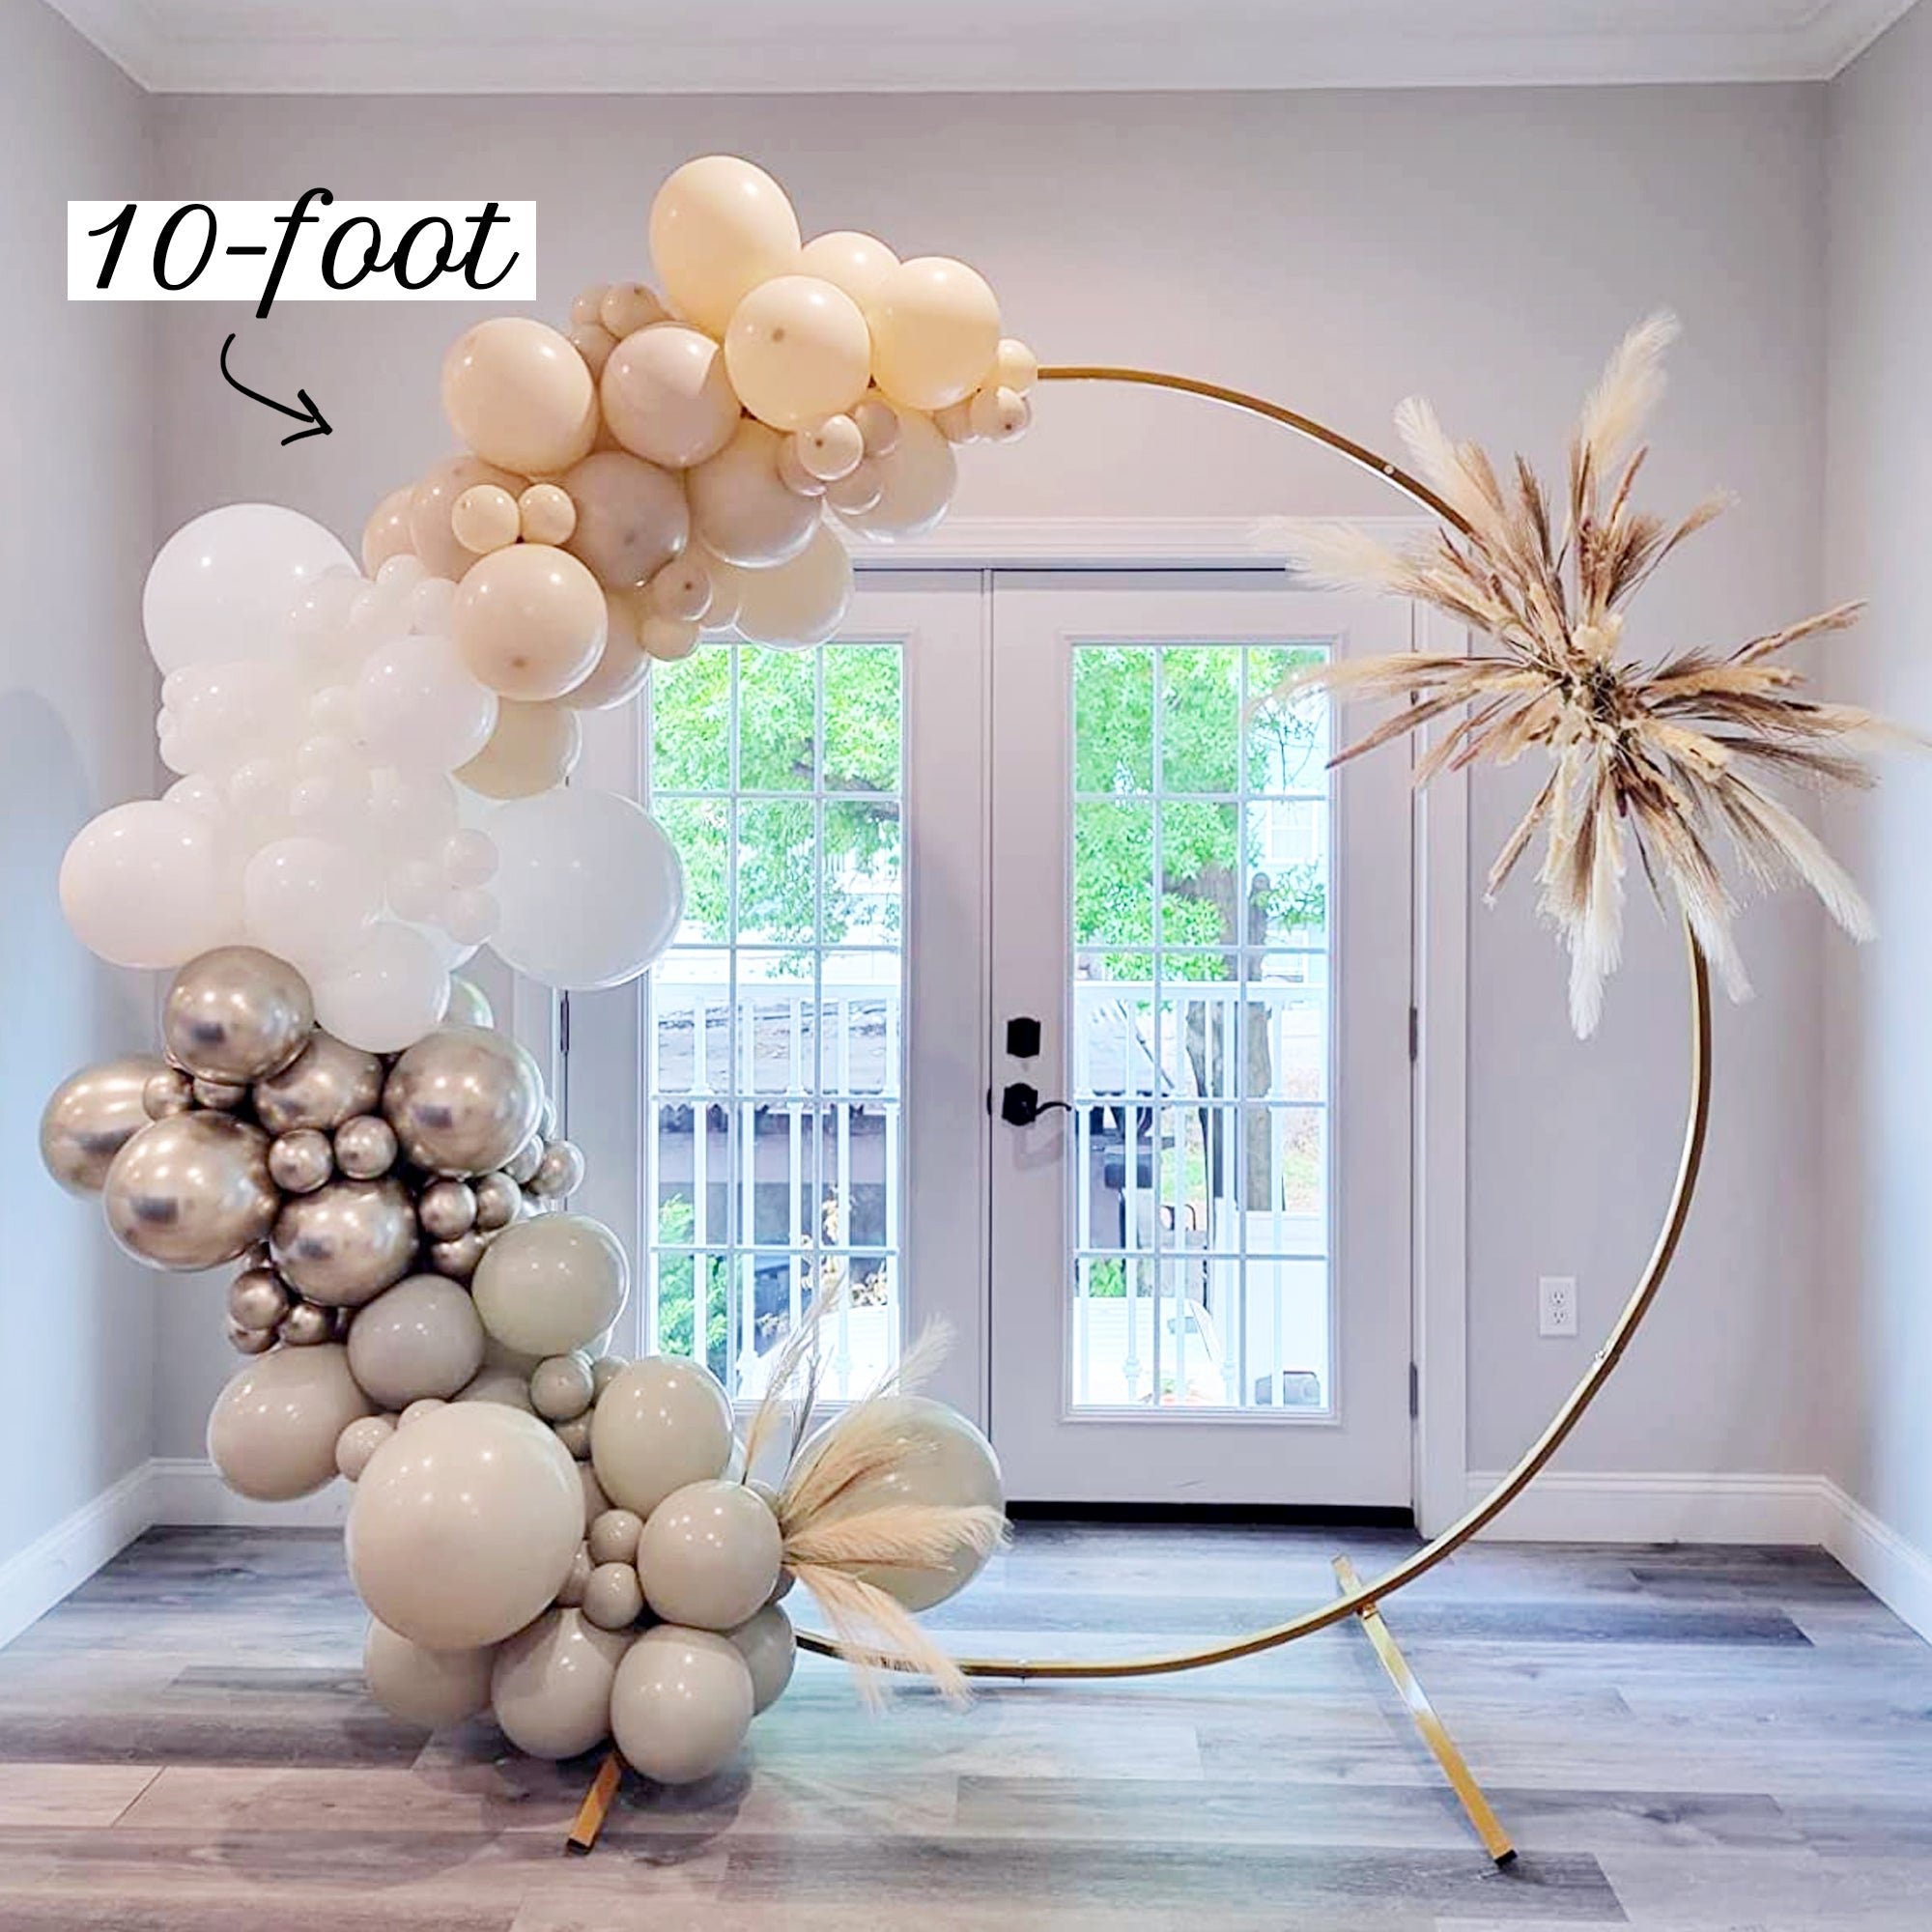 How to Make a Balloon Arch Balloon Garland The Ultimate Guide – Ellie's  Party Supply